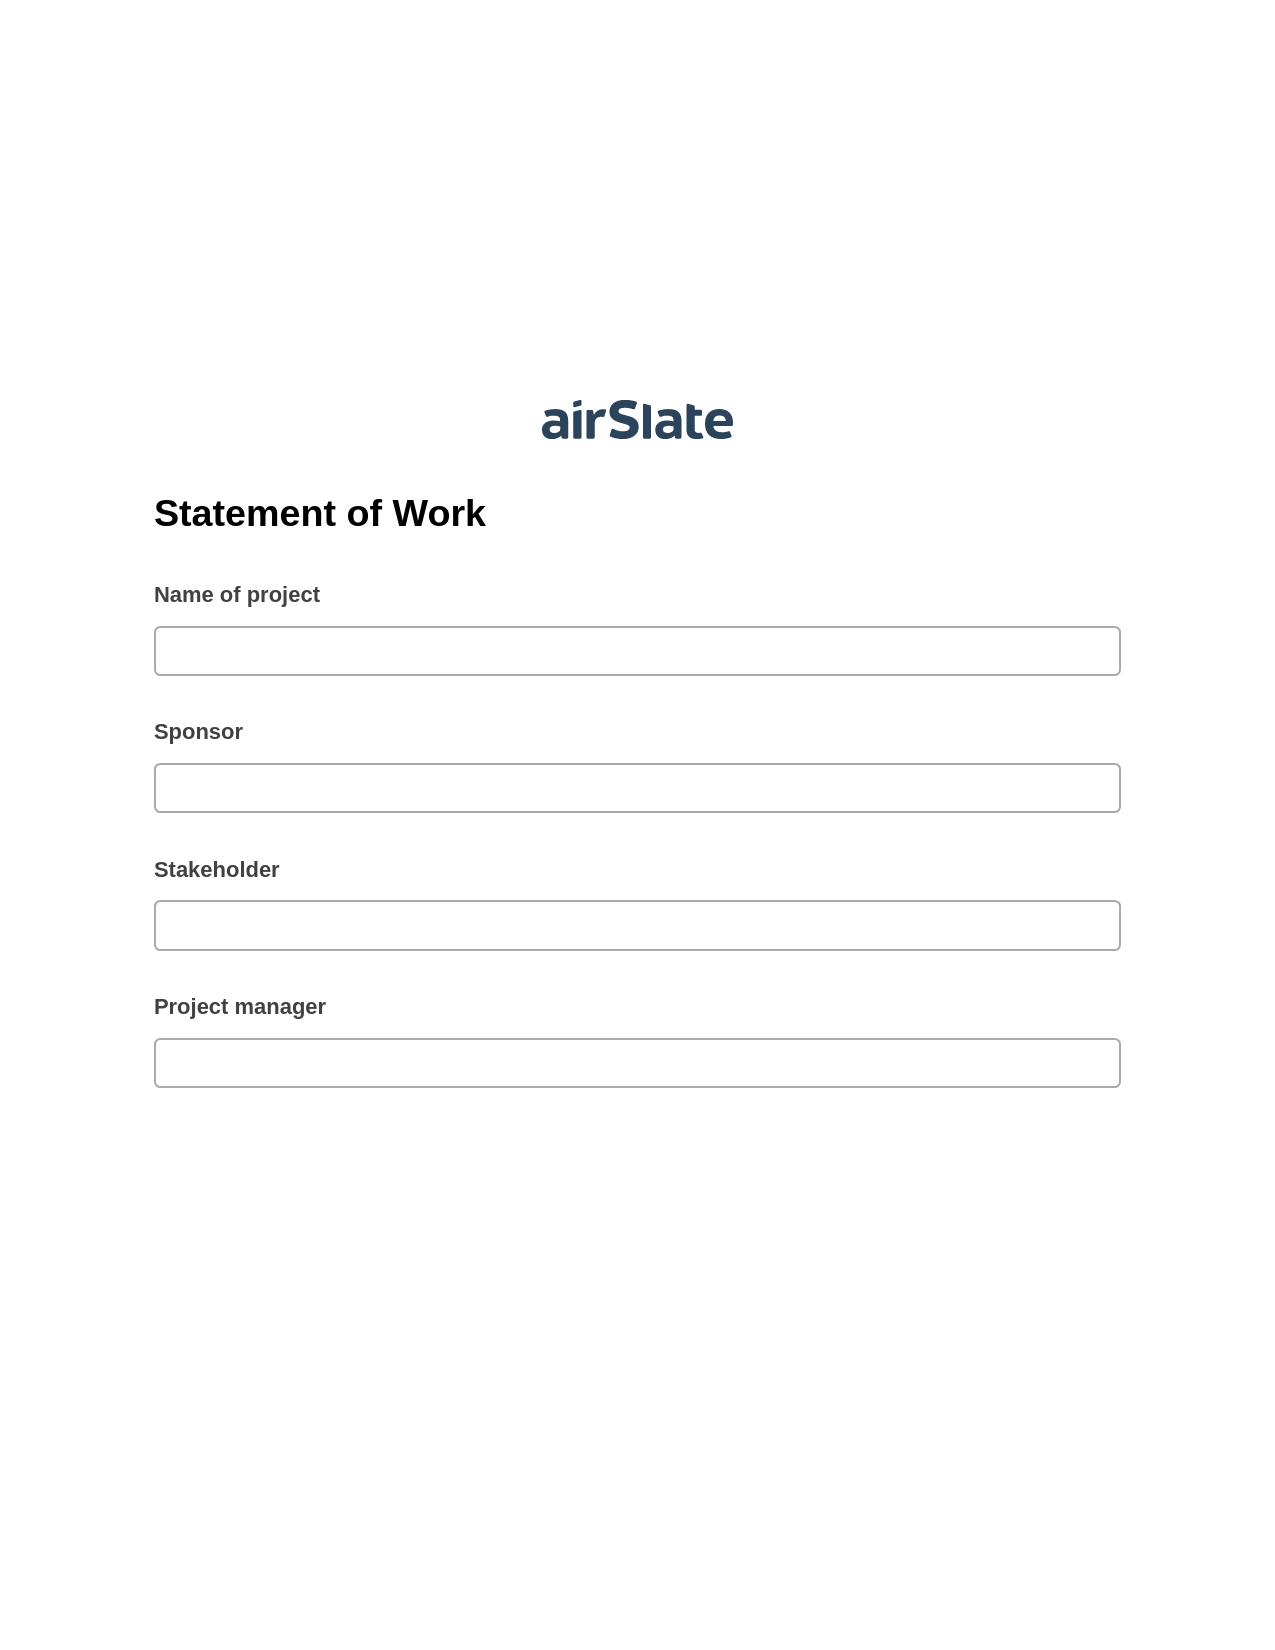 Statement of Work Pre-fill from another Slate Bot, Reminder Bot, Archive to SharePoint Folder Bot